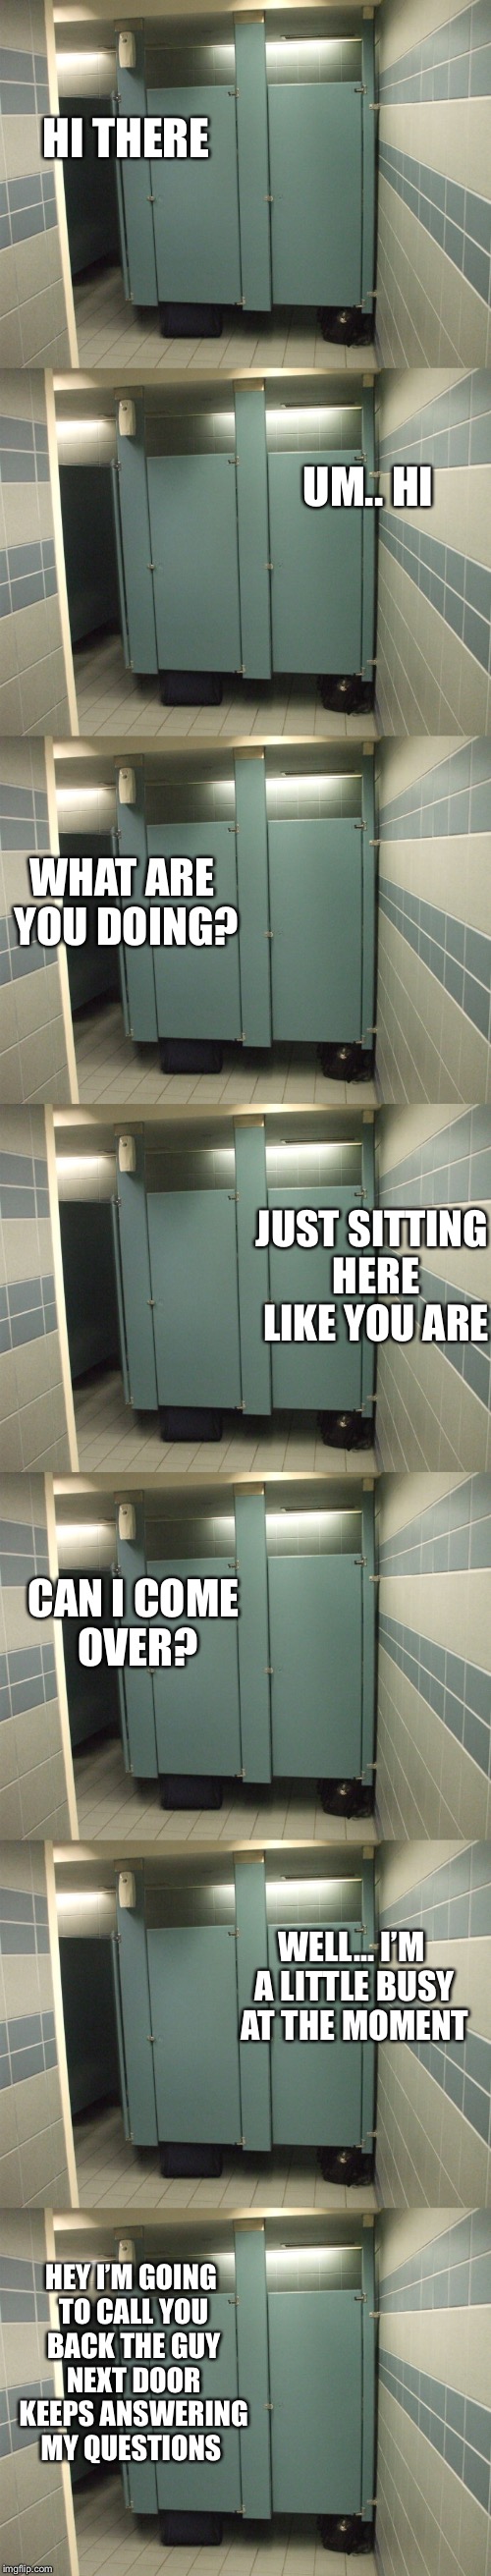 Bathroom talk |  HI THERE; UM.. HI; WHAT ARE YOU DOING? JUST SITTING HERE LIKE YOU ARE; CAN I COME OVER? WELL... I’M A LITTLE BUSY AT THE MOMENT; HEY I’M GOING TO CALL YOU BACK THE GUY NEXT DOOR KEEPS ANSWERING MY QUESTIONS | image tagged in bathroom stall | made w/ Imgflip meme maker